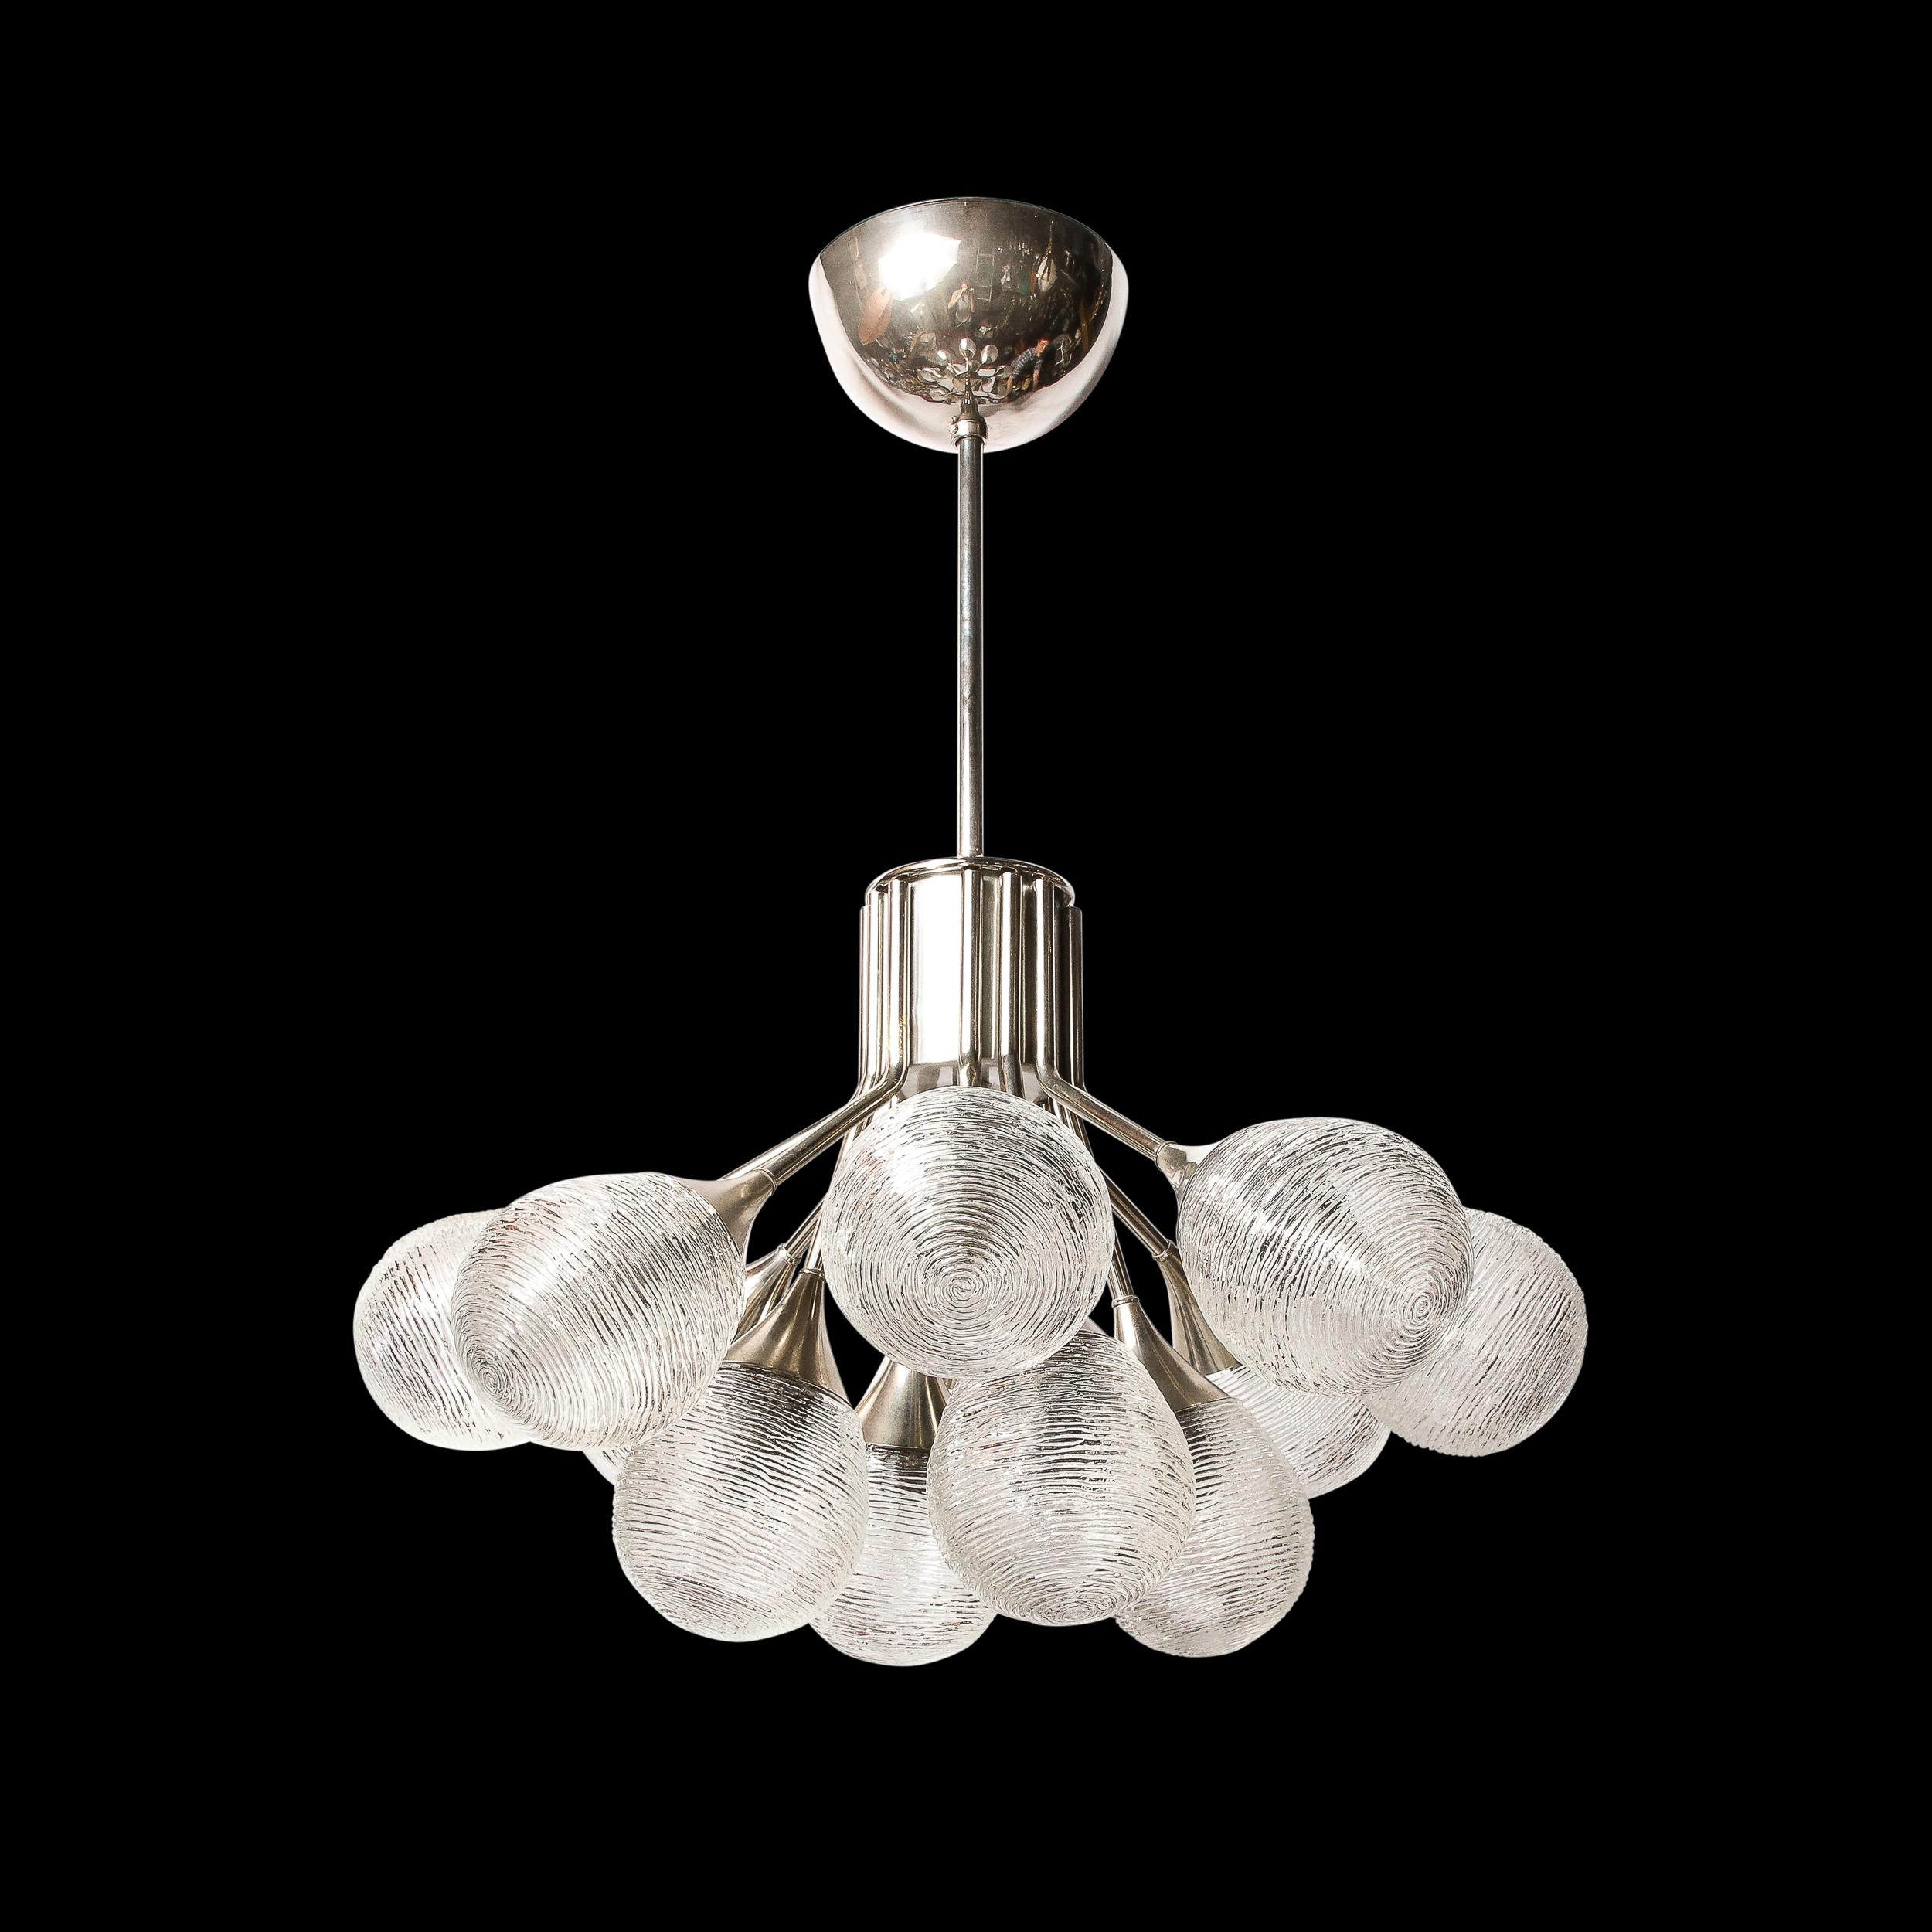 -This Mid-Century Modernist Sputnik Chandelier was created by Kaiser Leuchten and originates from Germany, Circa 1970. Featuring a unique downward facing sputnik form frame in chrome with a central joining cylinder in brushed Aluminum, this piece